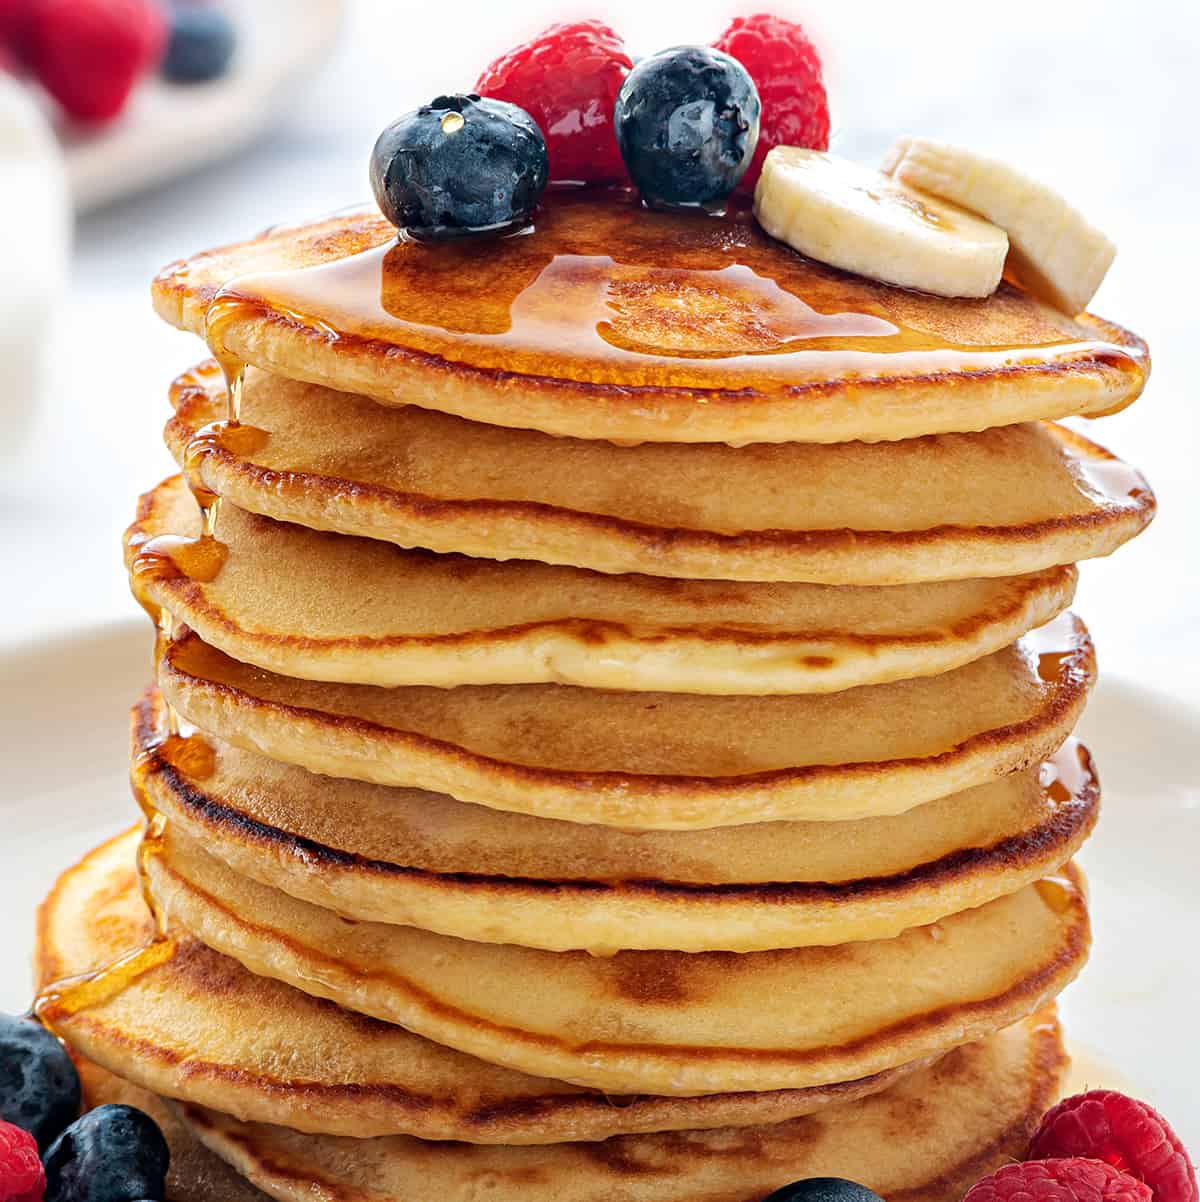 Easy And Delicious Homemade Pancakes Recipe: How To Make Pancakes From Scratch